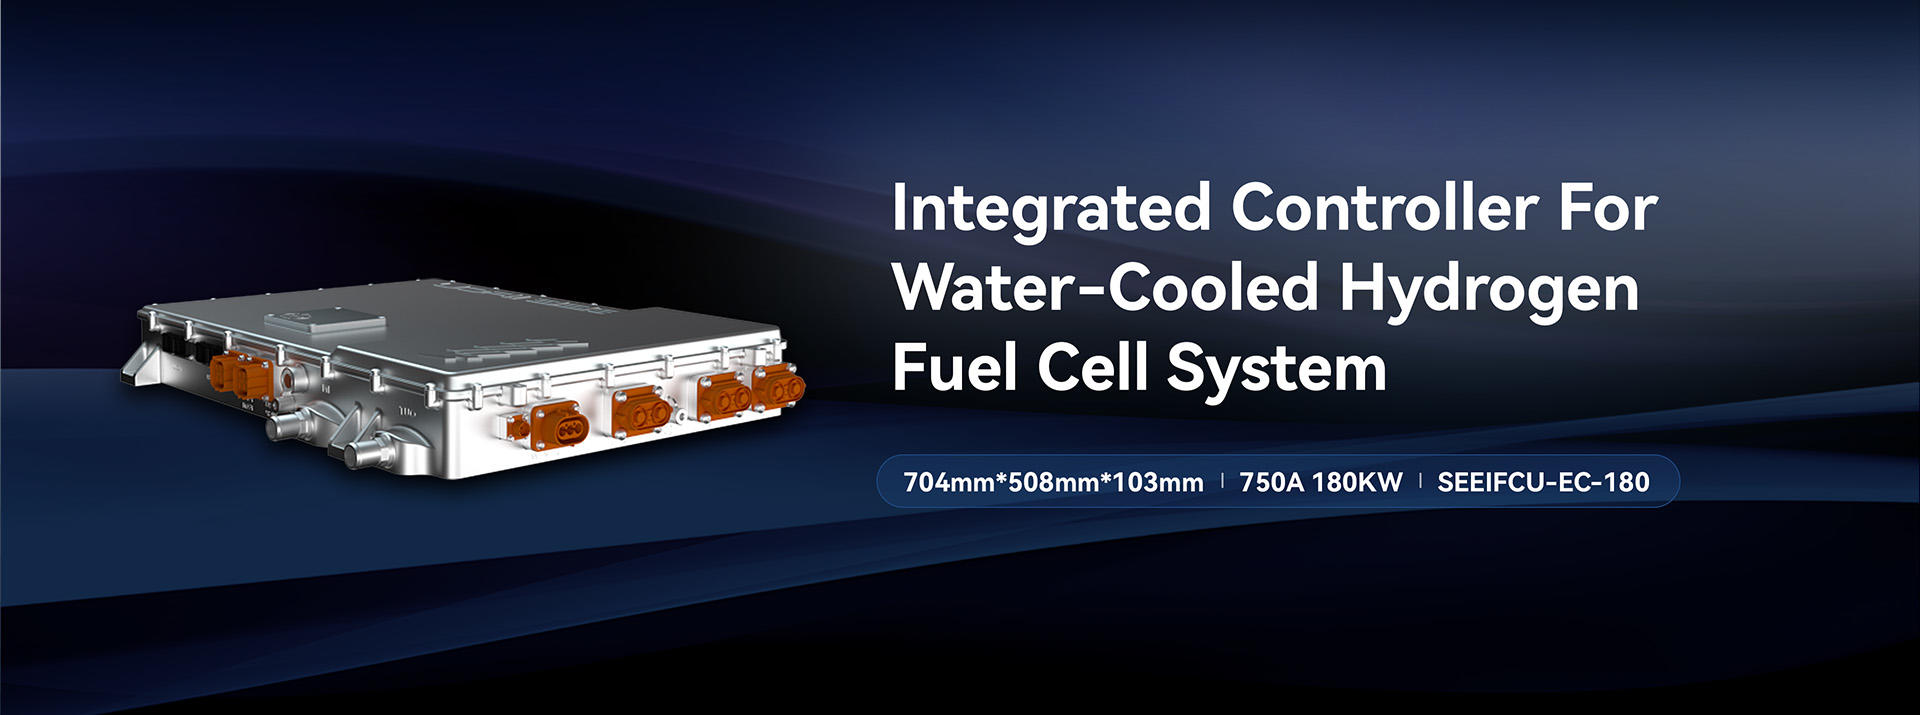 Integrated Controller For Water-Cooled Hydrogen Fuel Cell System